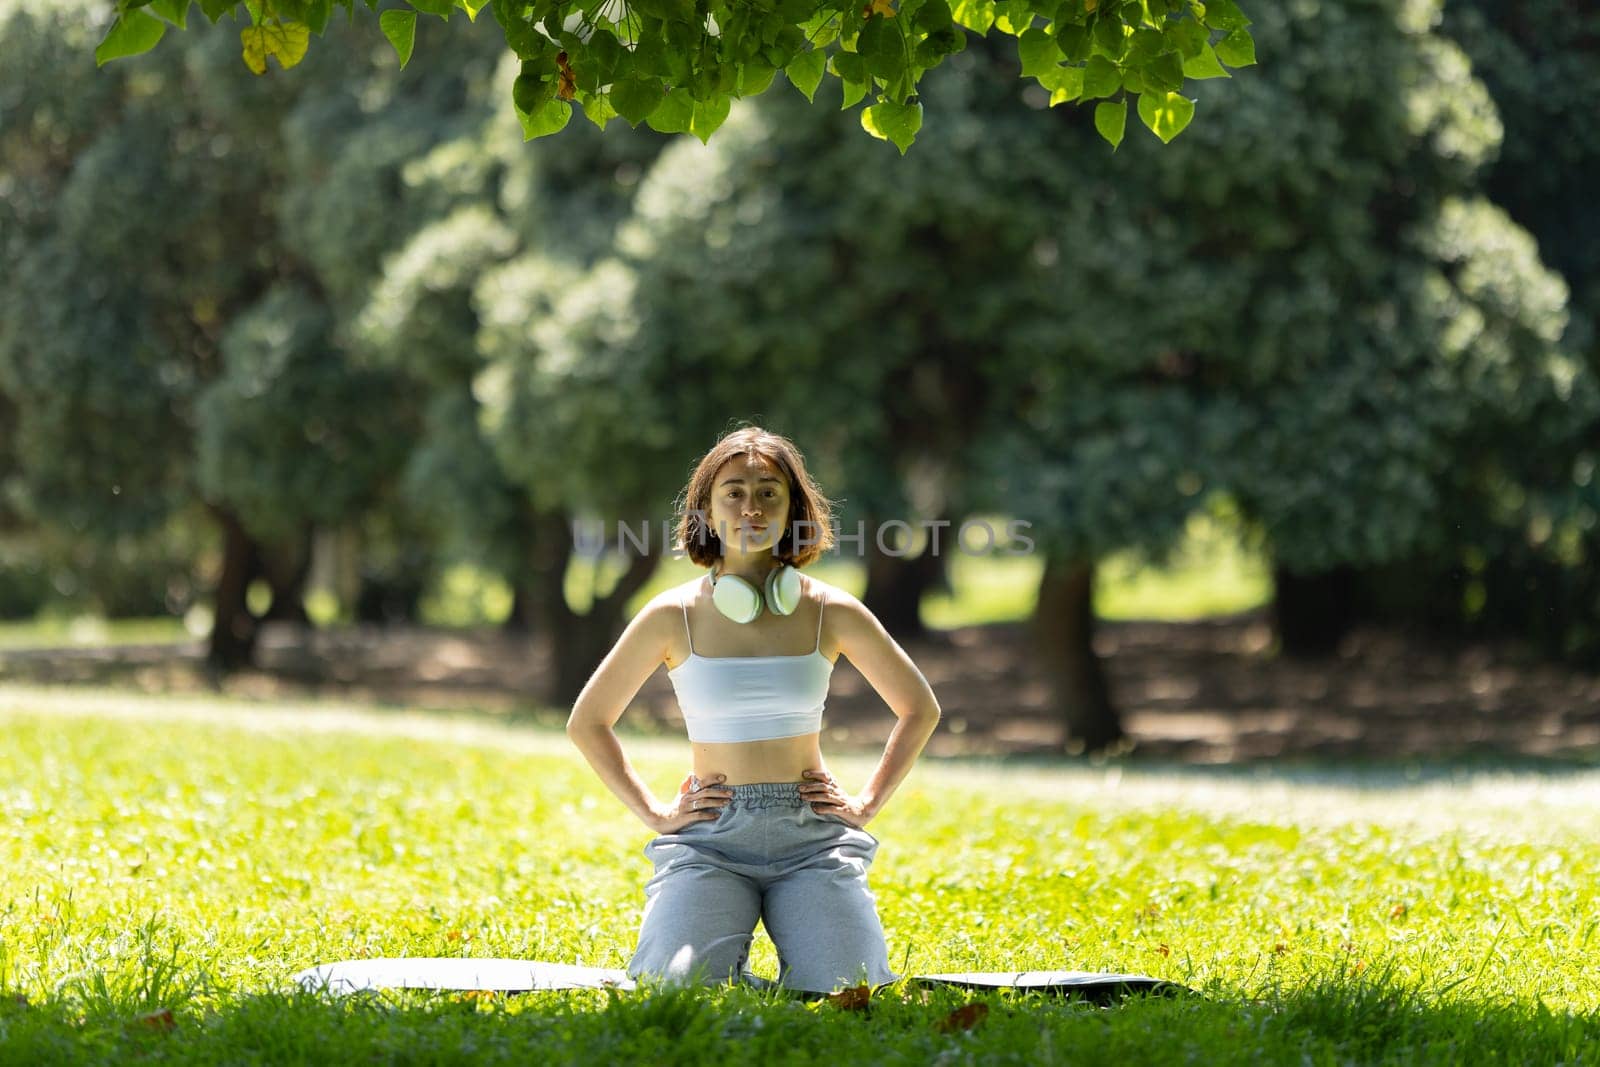 A woman is sitting on the grass in a park. She is wearing headphones and has her arms crossed